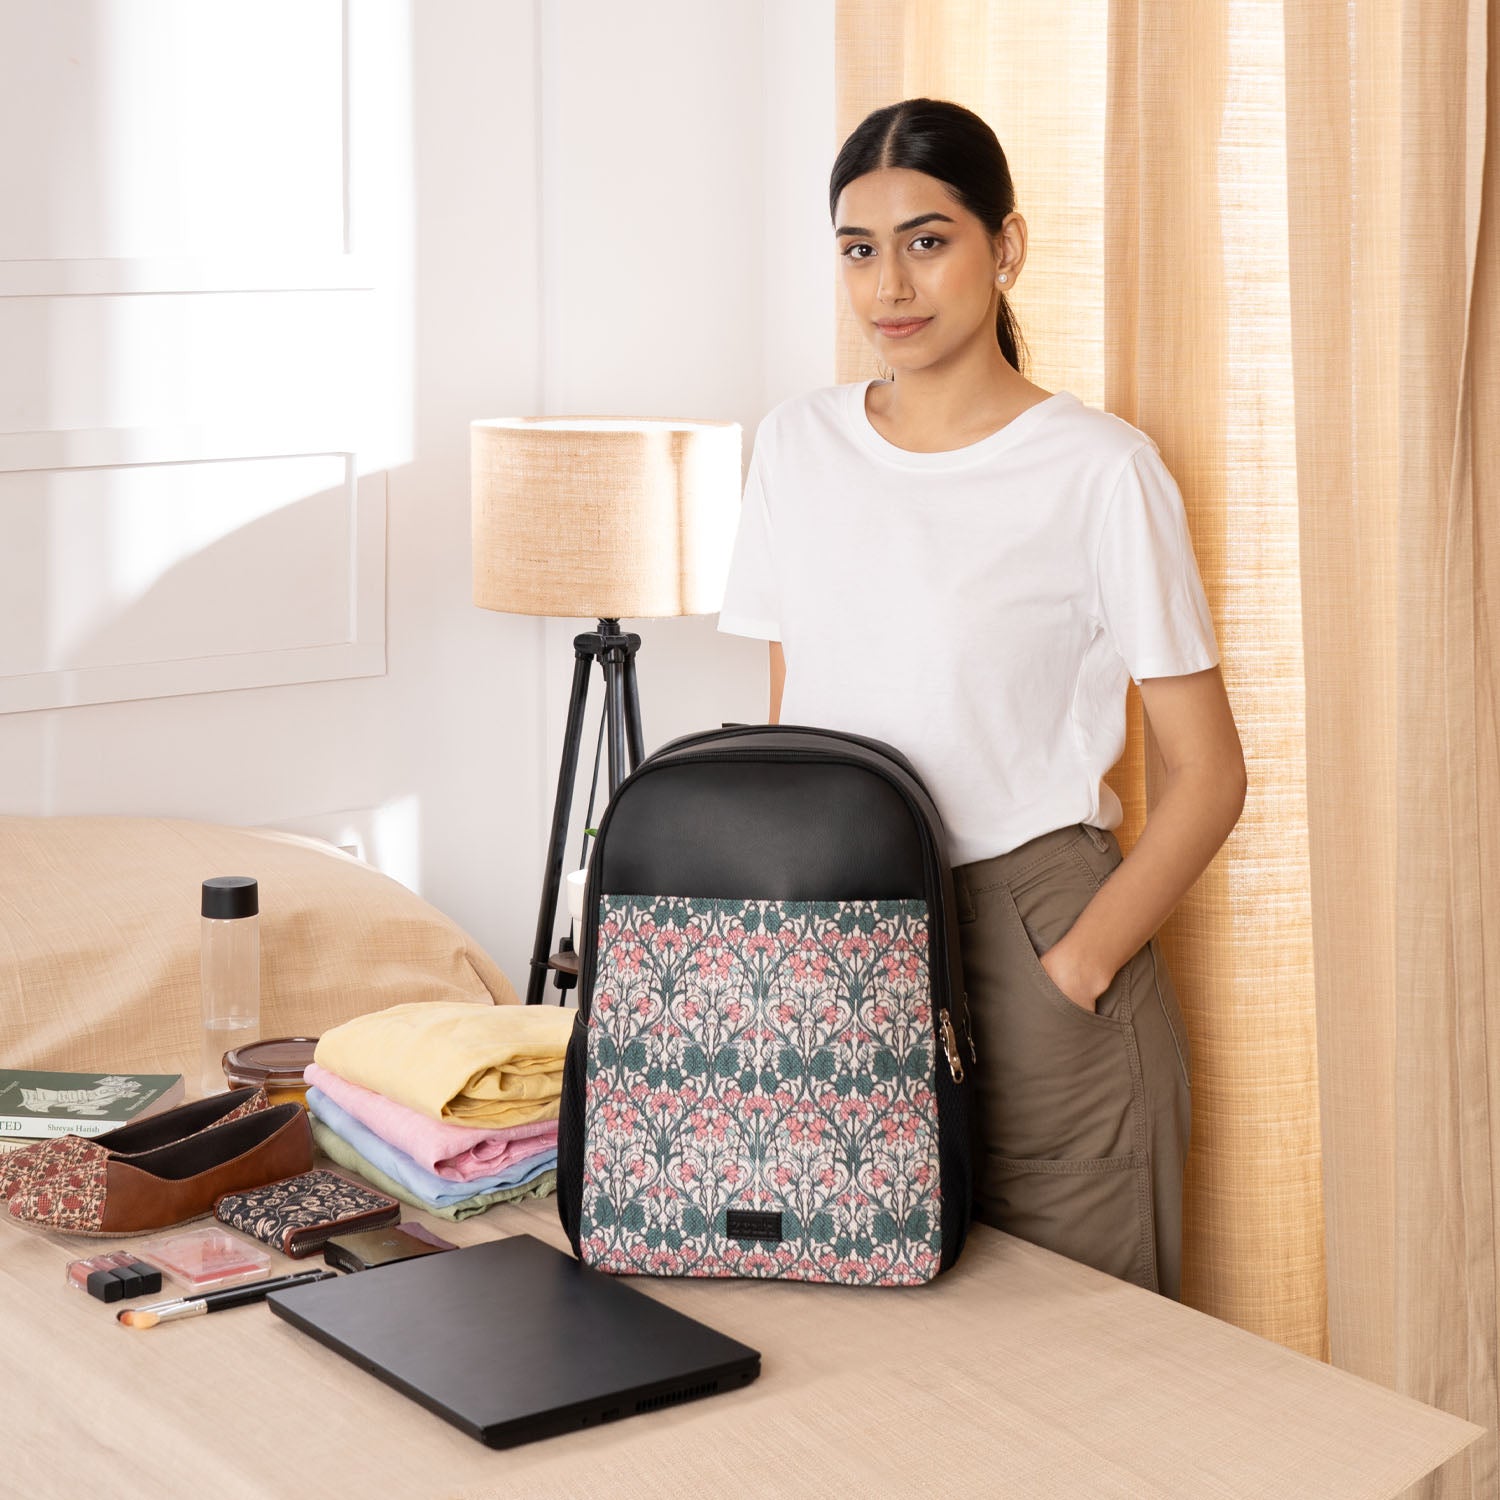 Hooghly Nouveau Statement Backpack